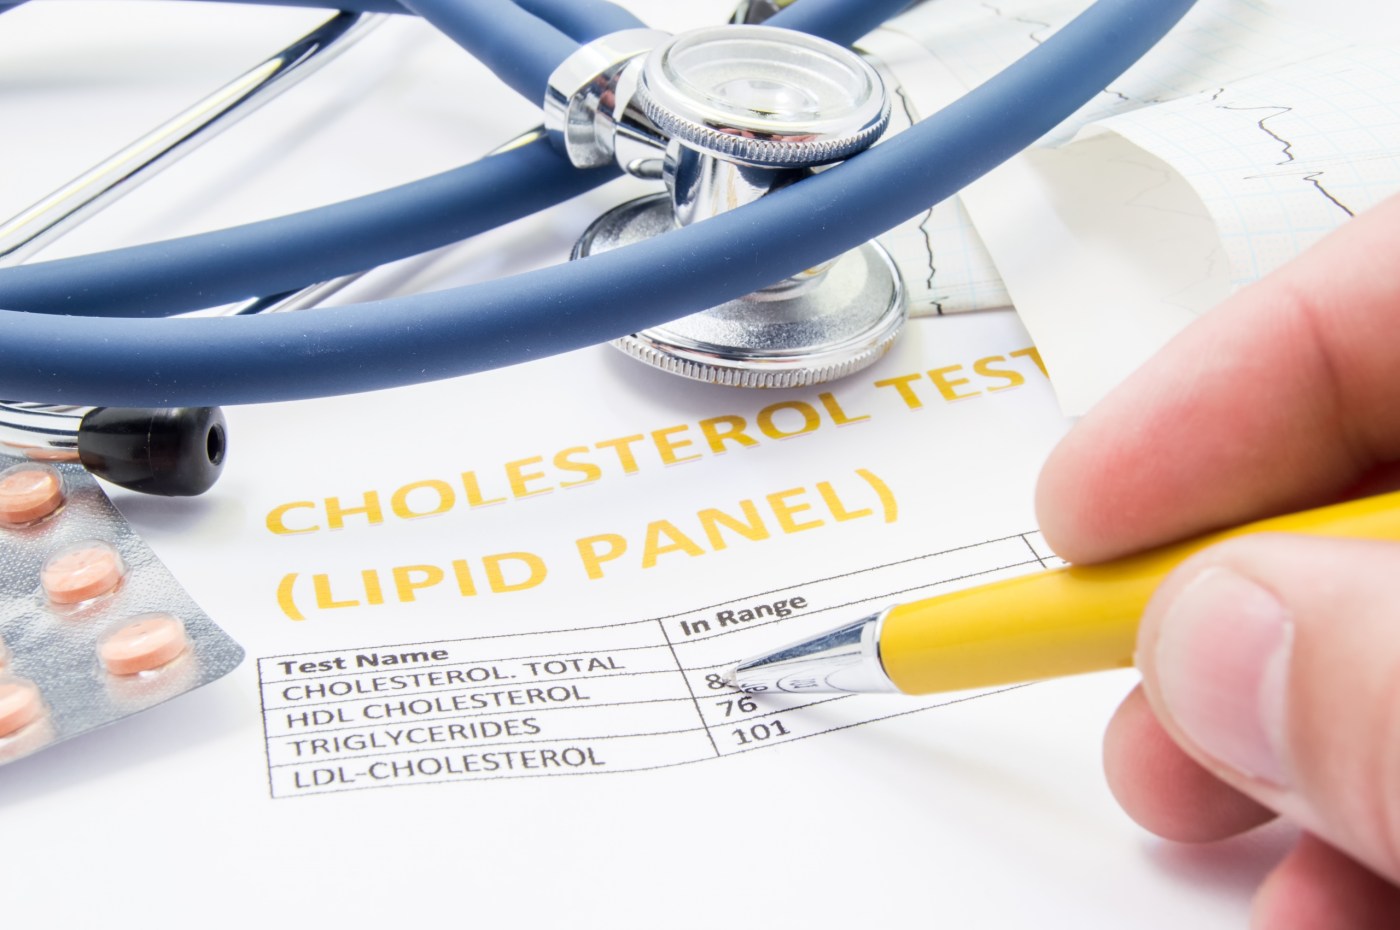 A VA study has documented a link between cholesterol-lowering statin drugs and diabetes progression.